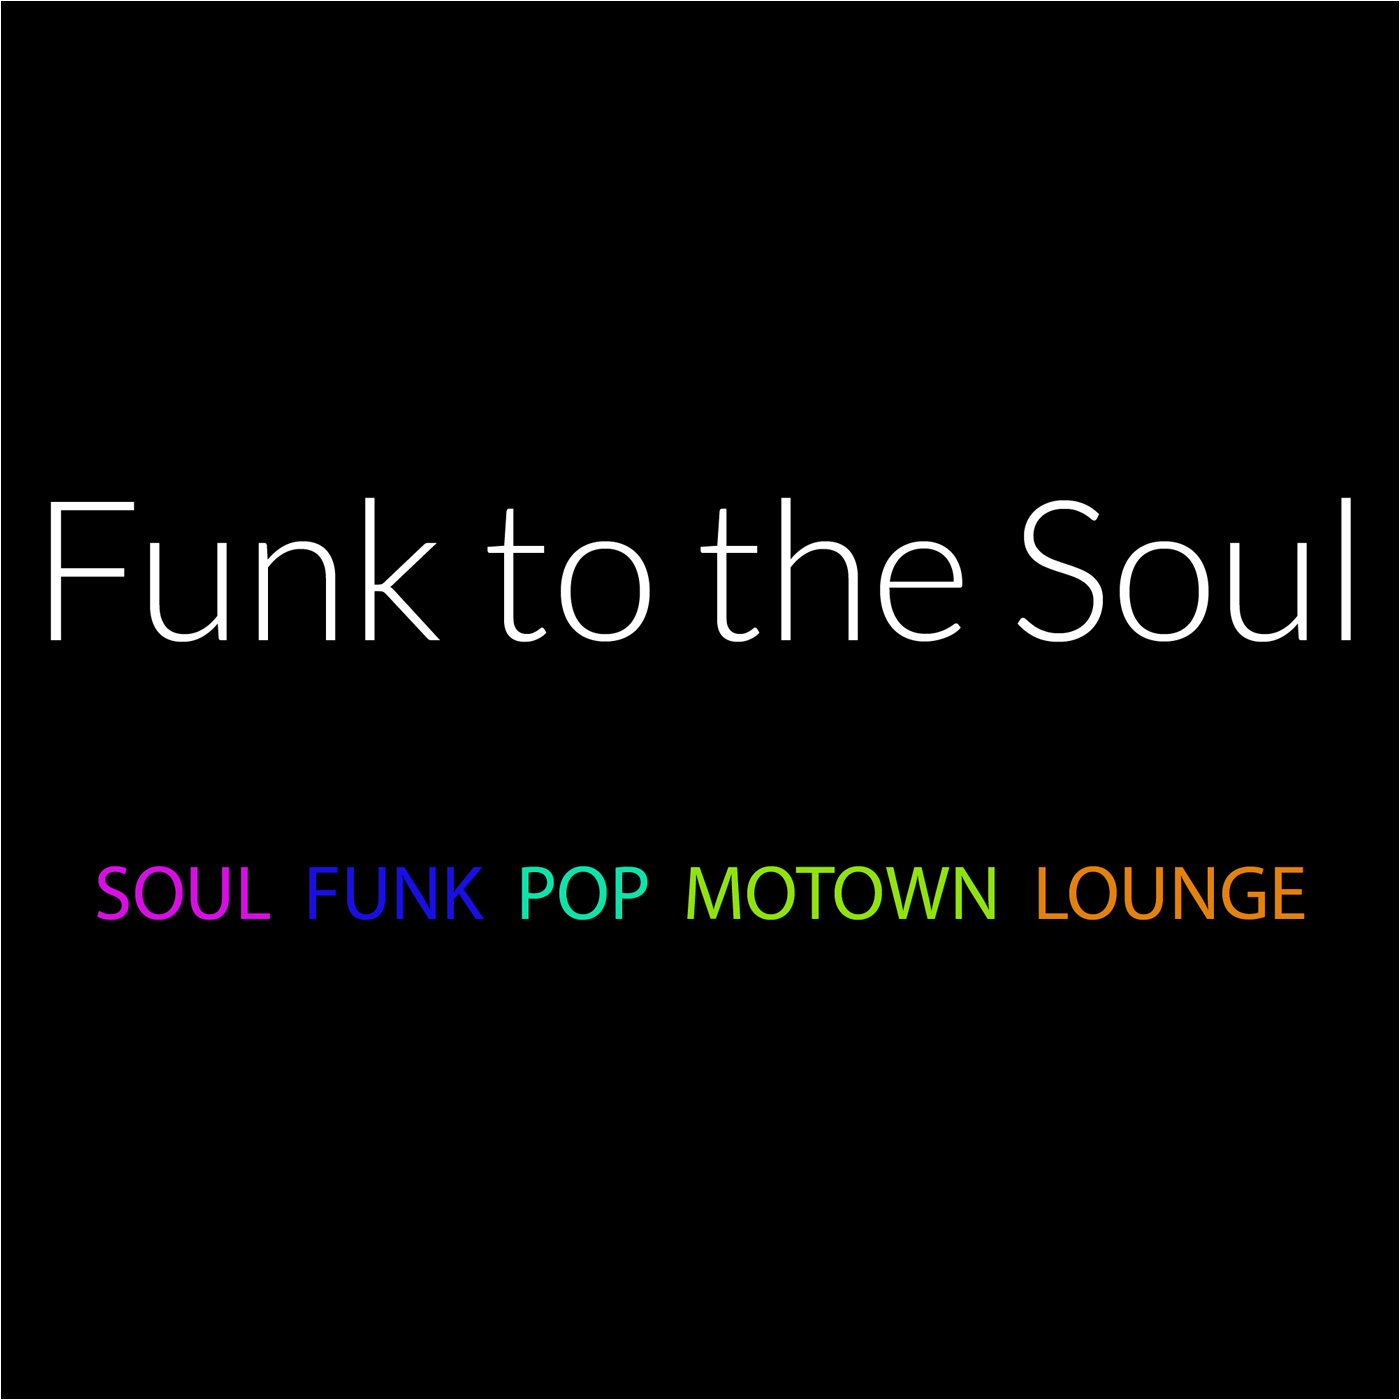 Funk to the Soul